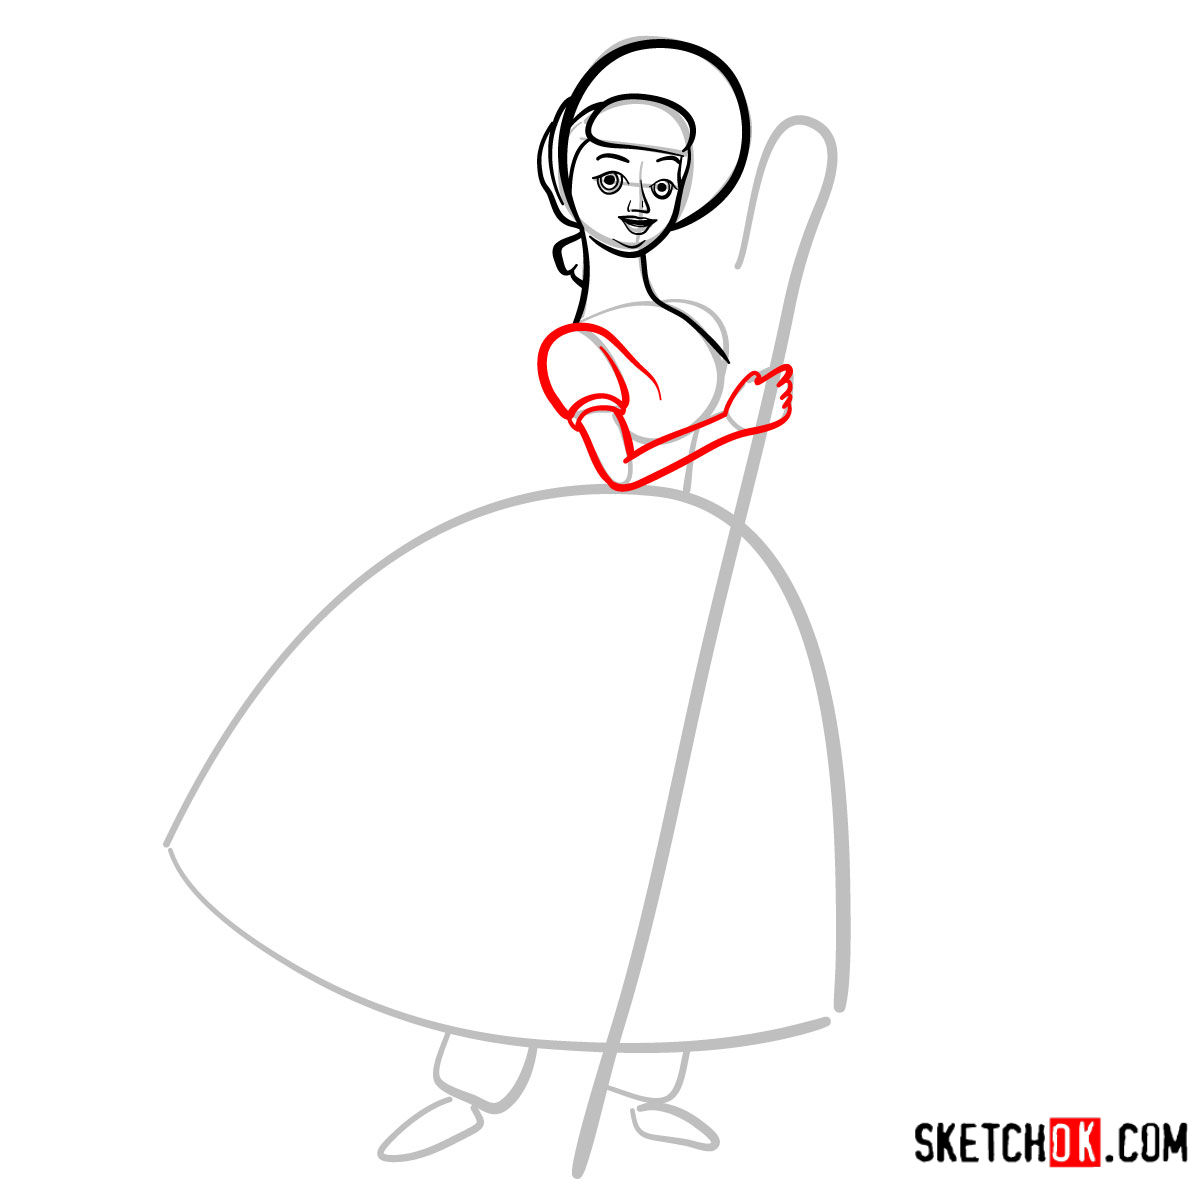 How to draw Bo Peep from Toy Story - step 06